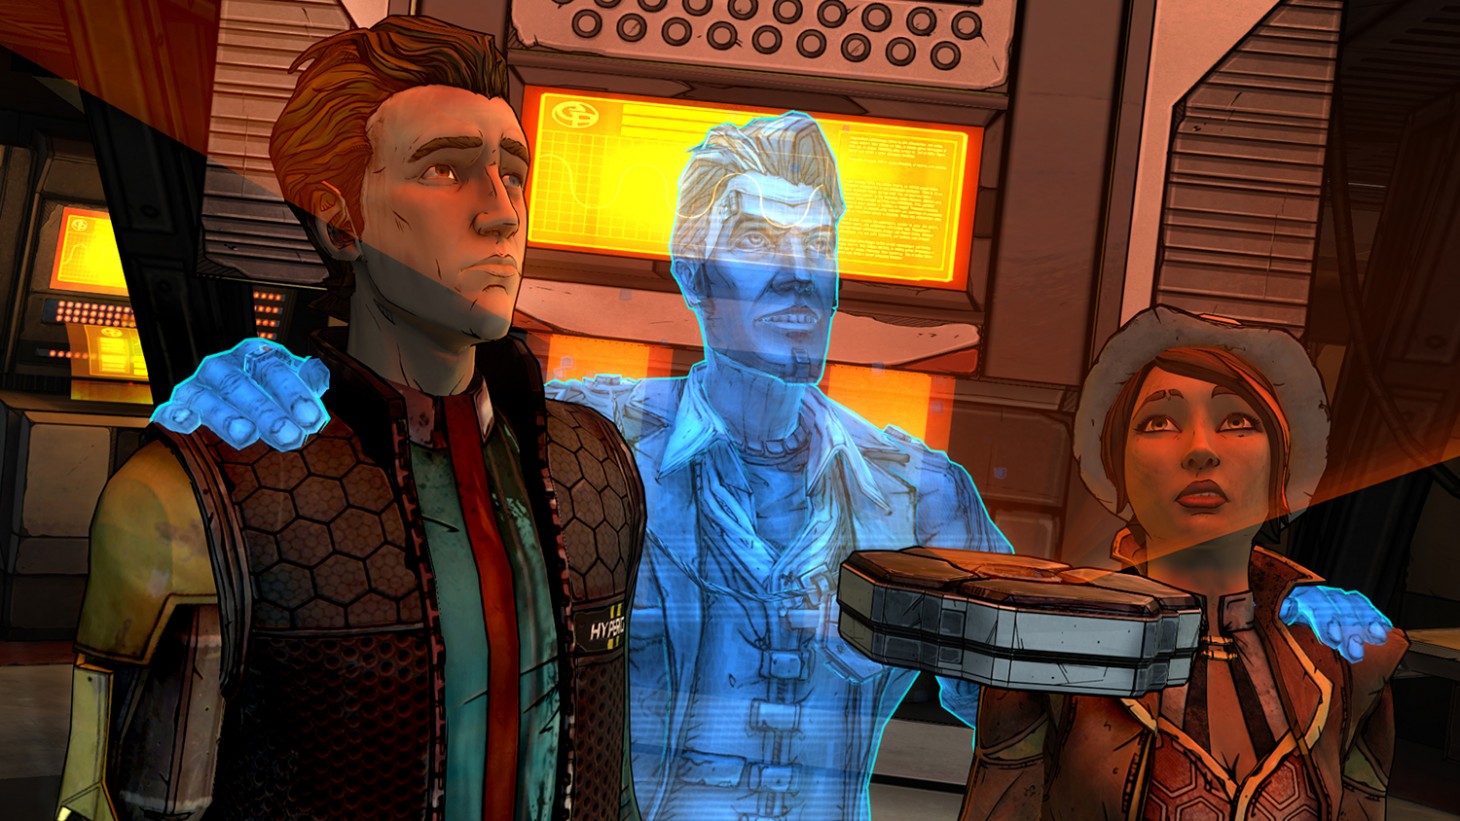 graphic adventure games - TELLTALE'S TALES FROM THE BORDERLANDS